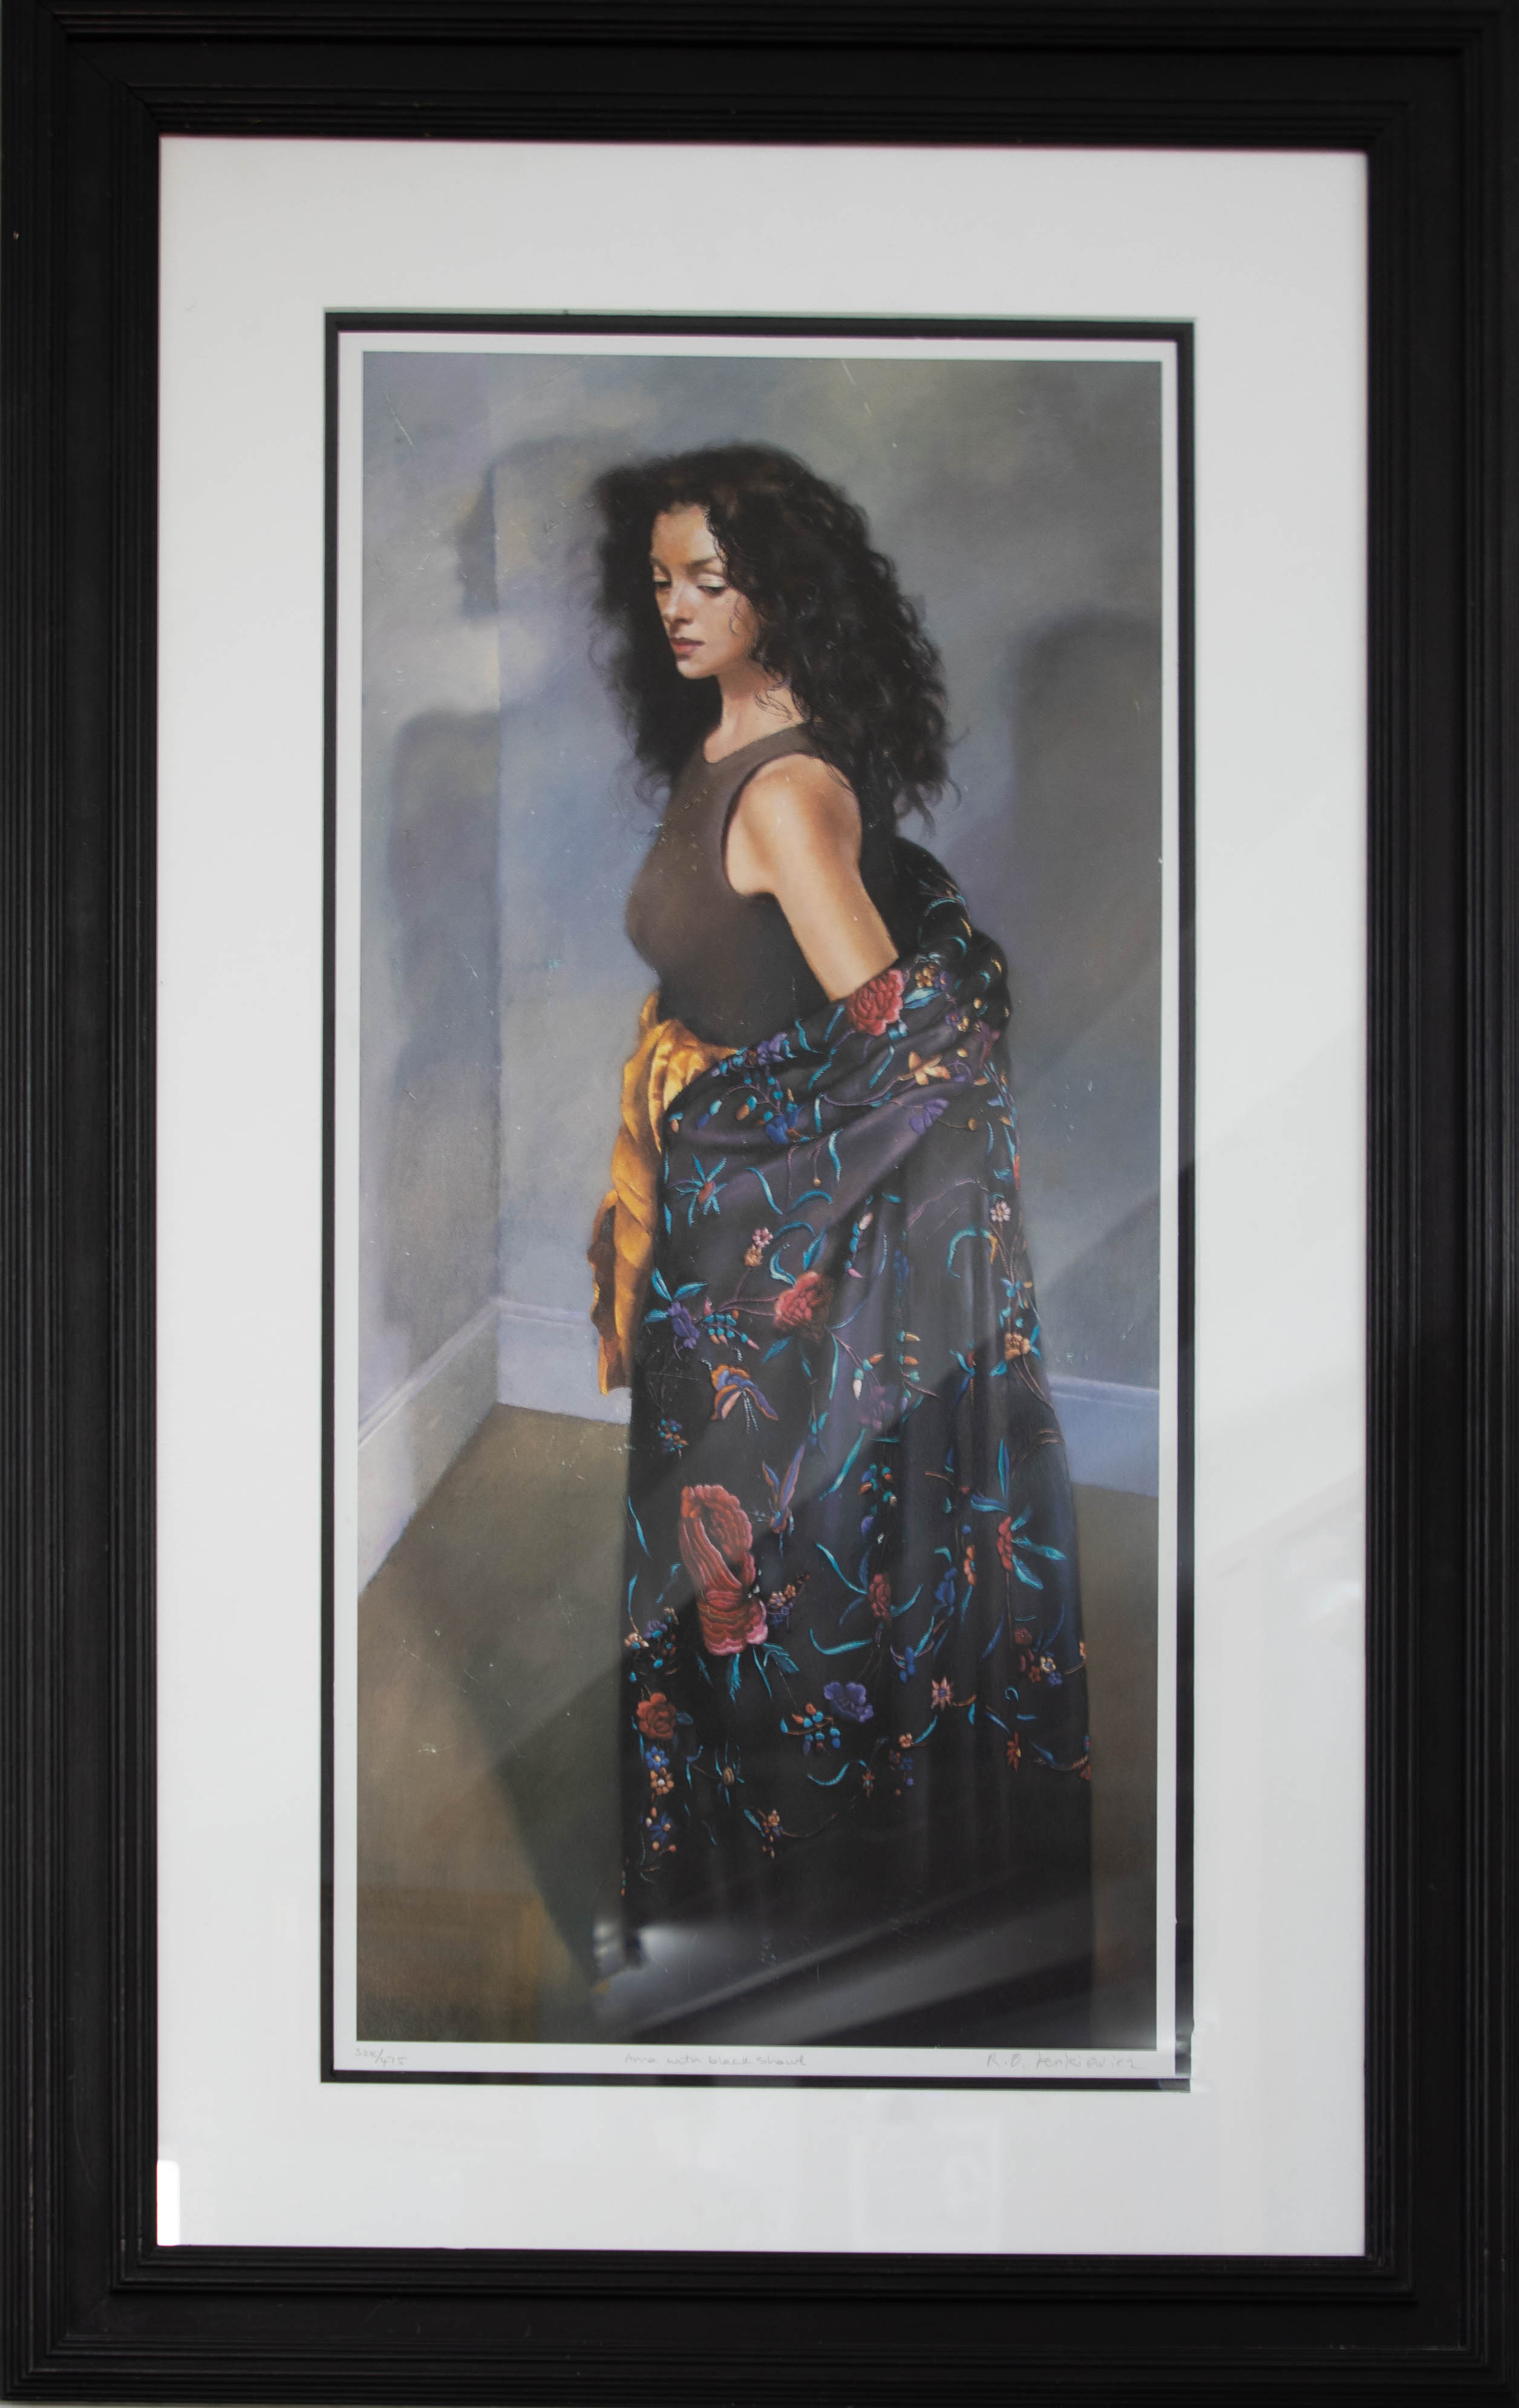 Robert Lenkiewicz (1941-2002), print, 'Anna with Black Shawl' signed limited edition 328/475, framed